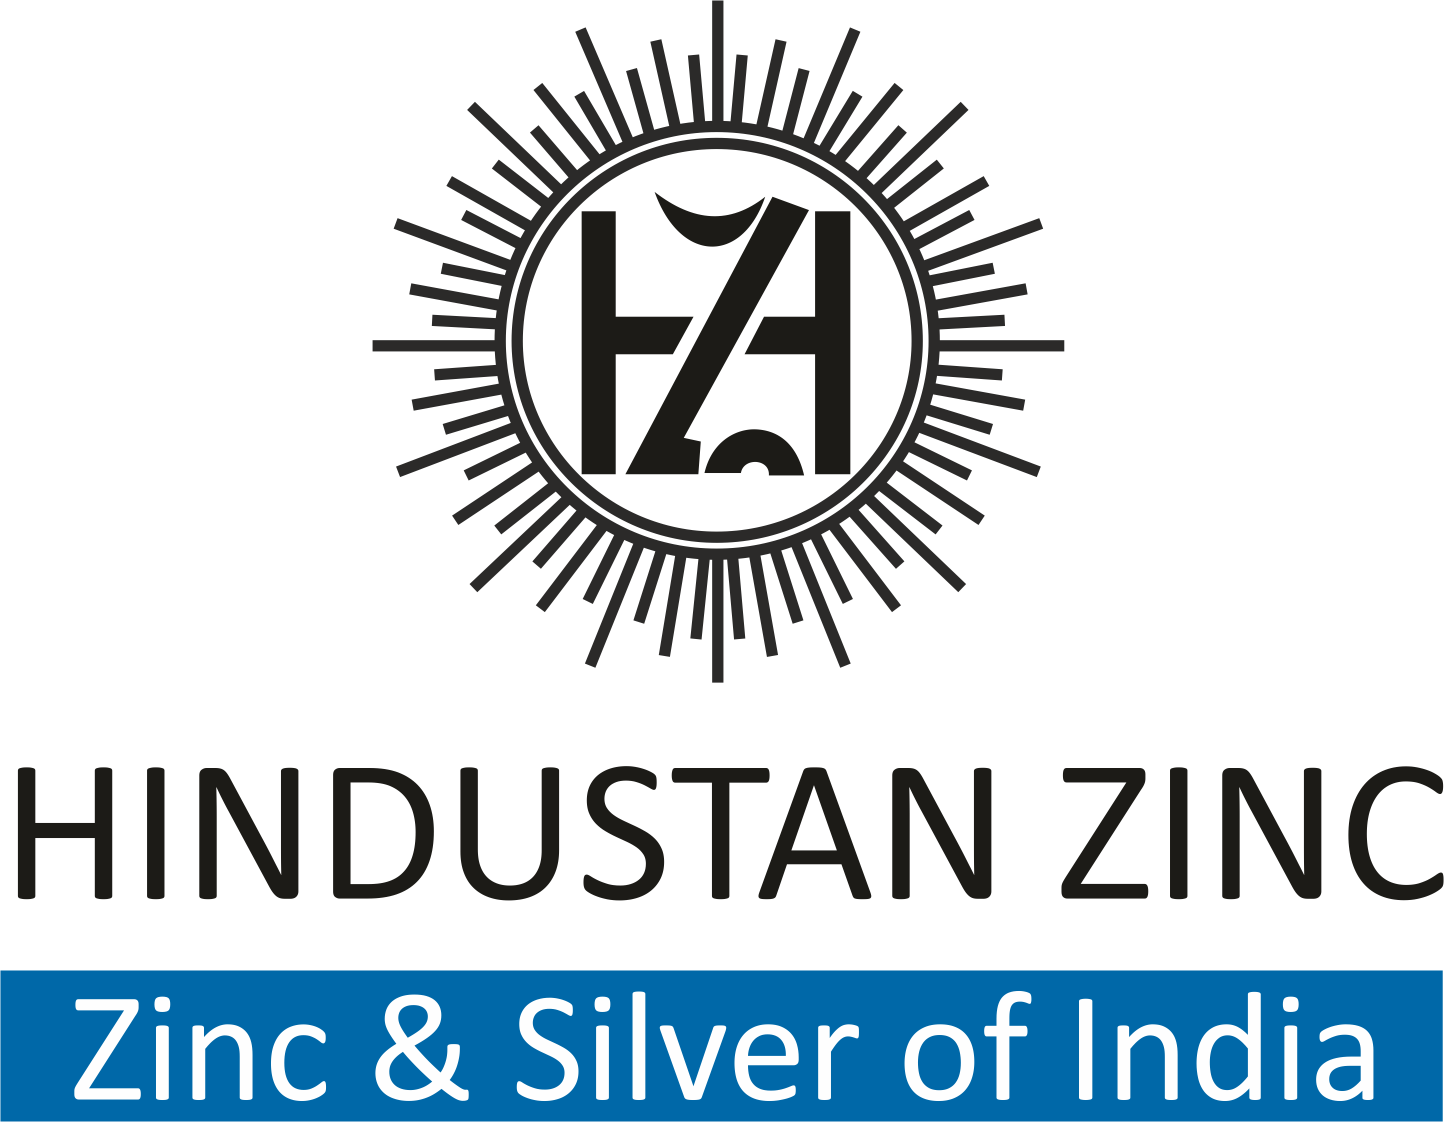 Hindustan Zinc Inaugurates Mining Academy at Zawar to Enhance Skills of In-house Talent in Mining Operations